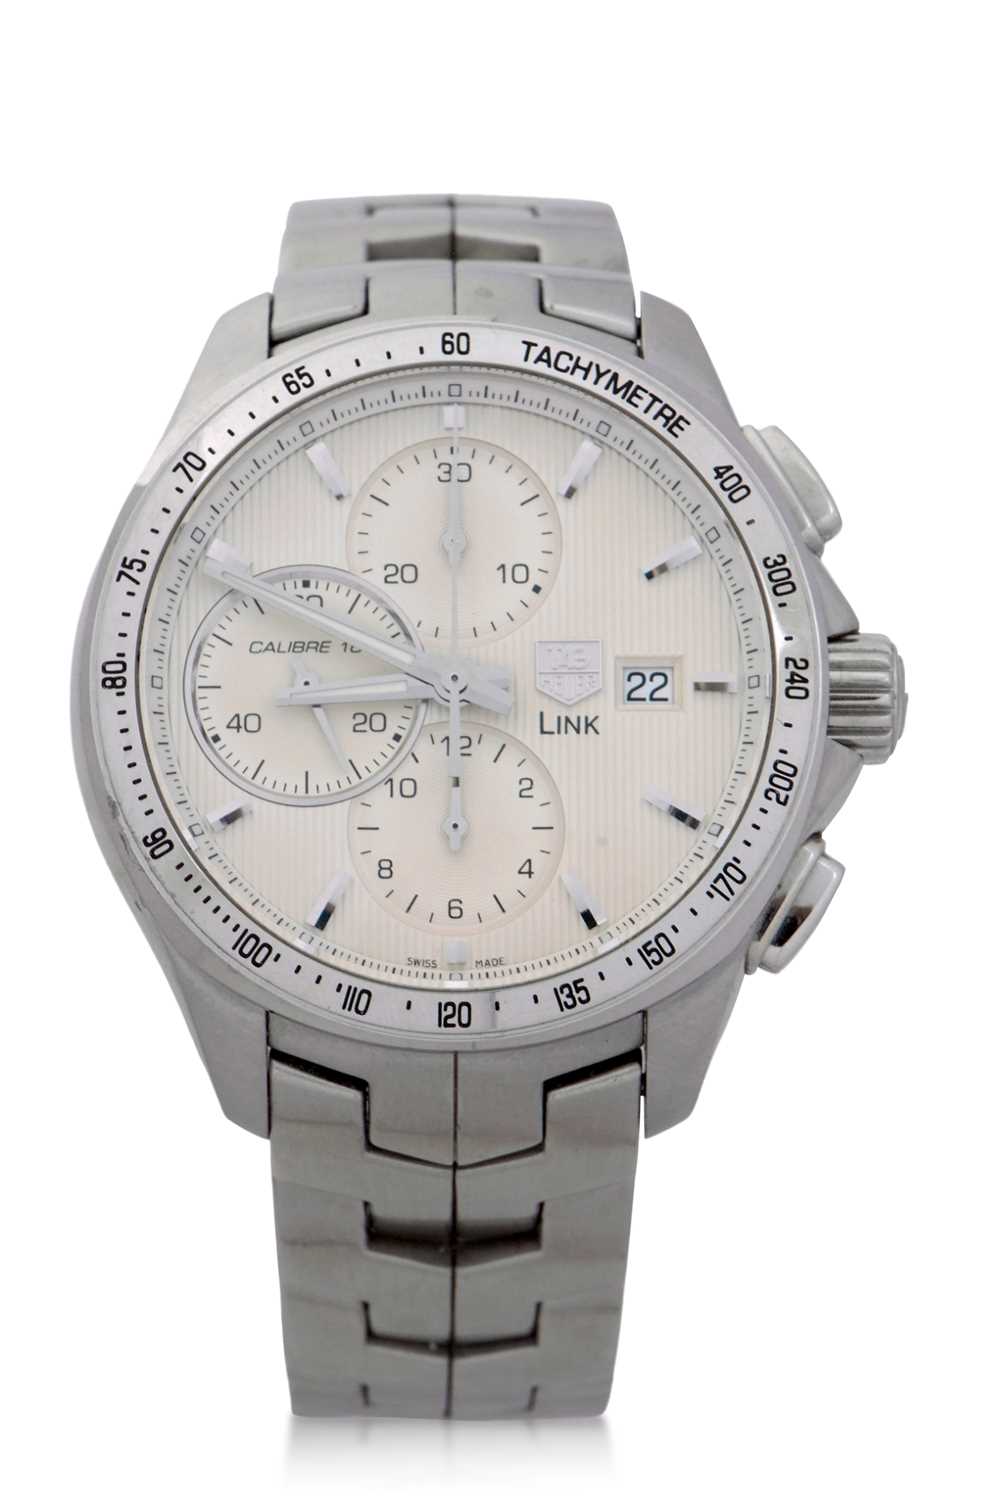 A Tag Heuer Link Chrongraph calibre 16 wristwatch, reference number CAT2011, the watch has an